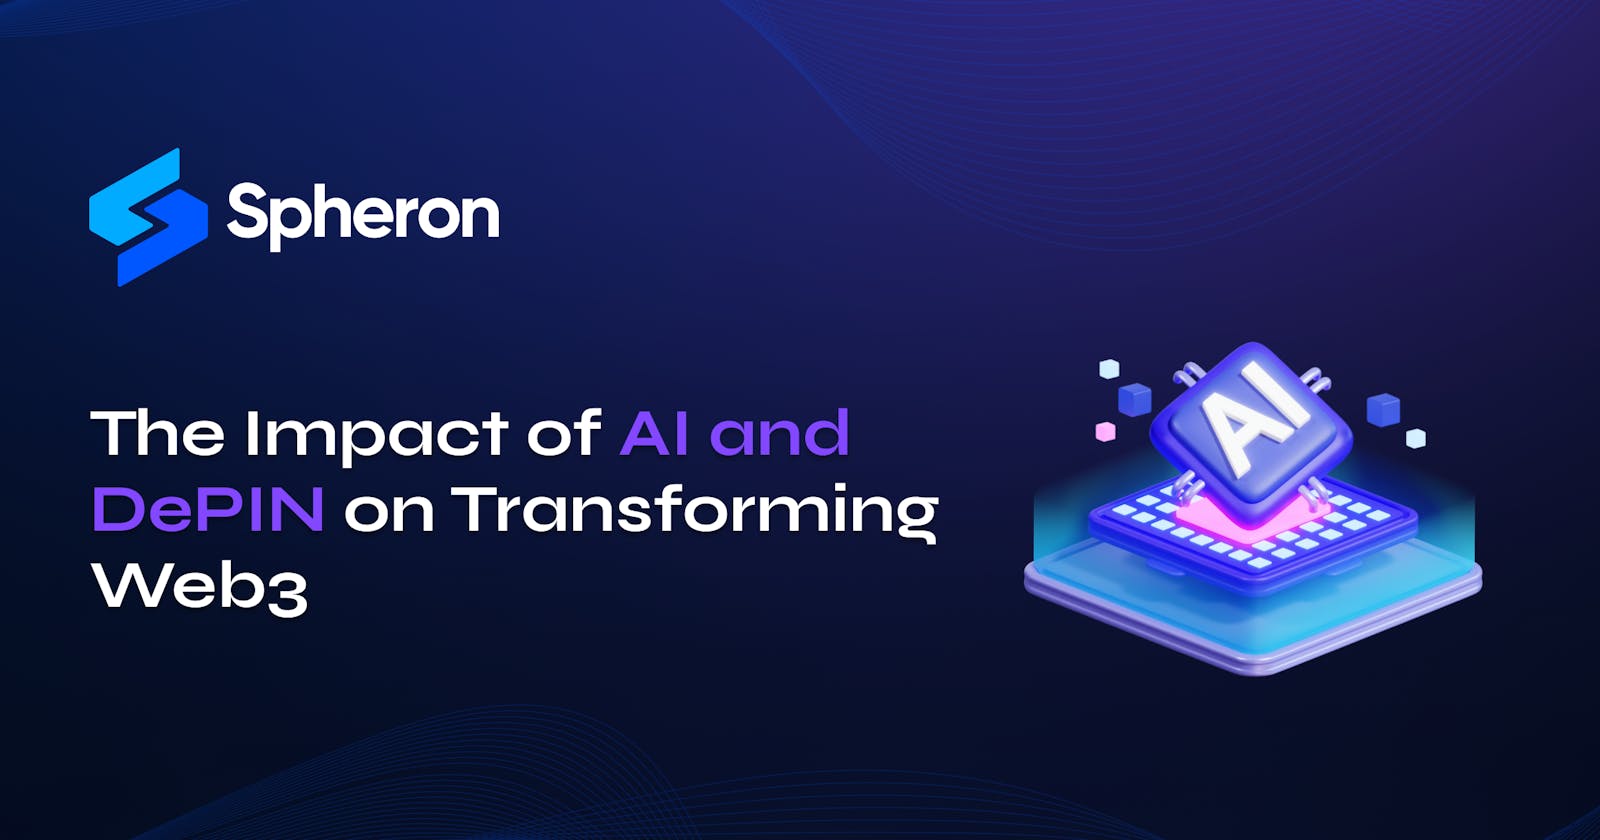 The Impact of AI and DePIN on Transforming Web3